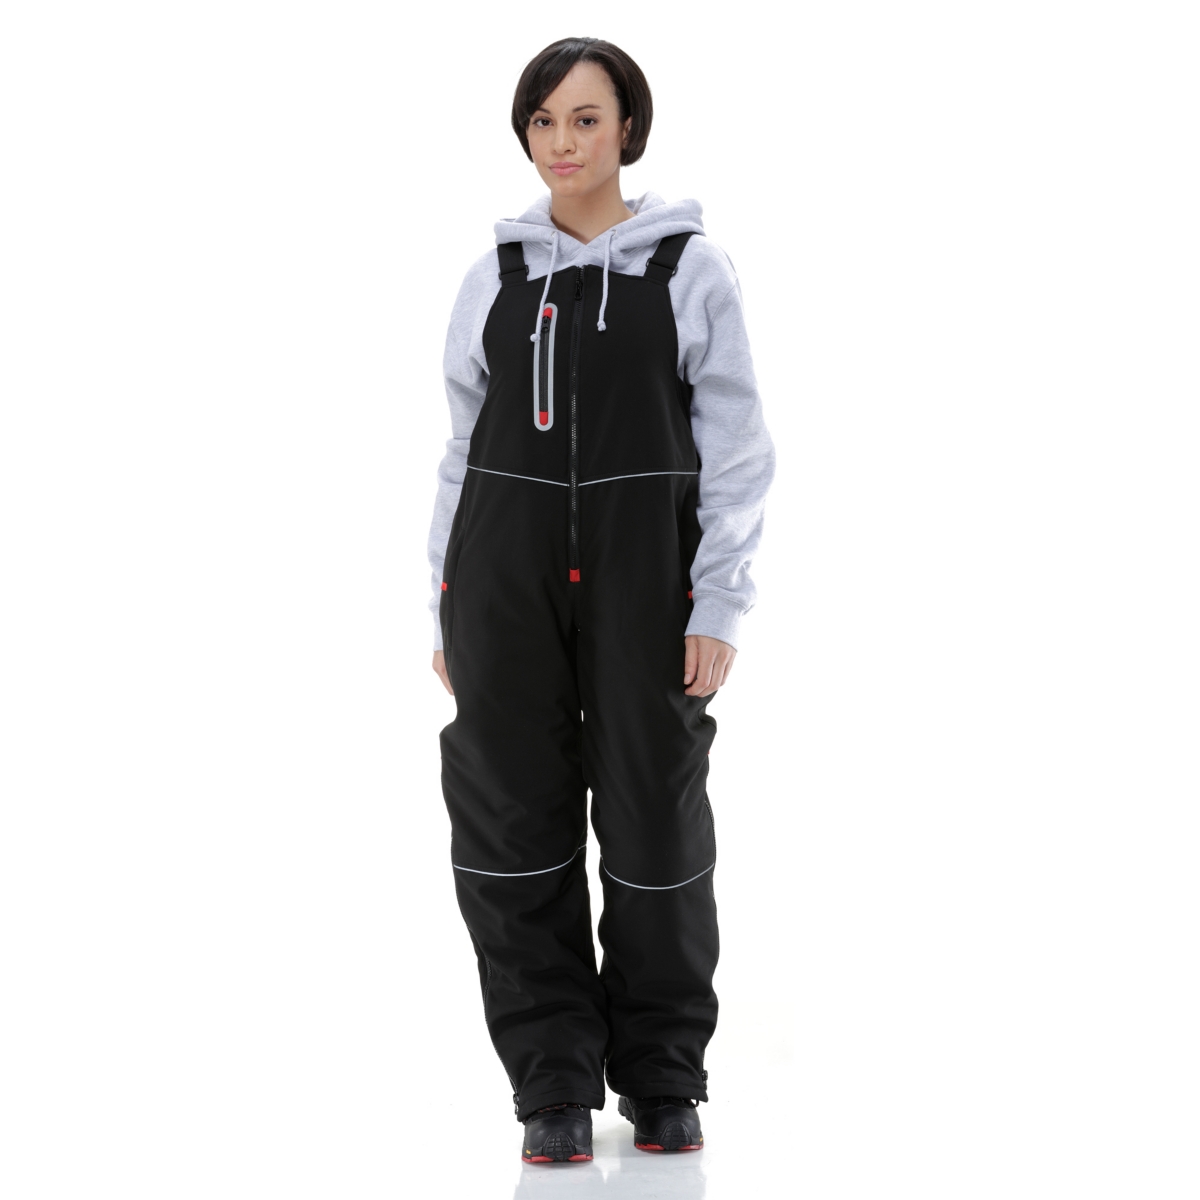 Plus Size Insulated Softshell Bib Overalls with Reflective Piping - Black